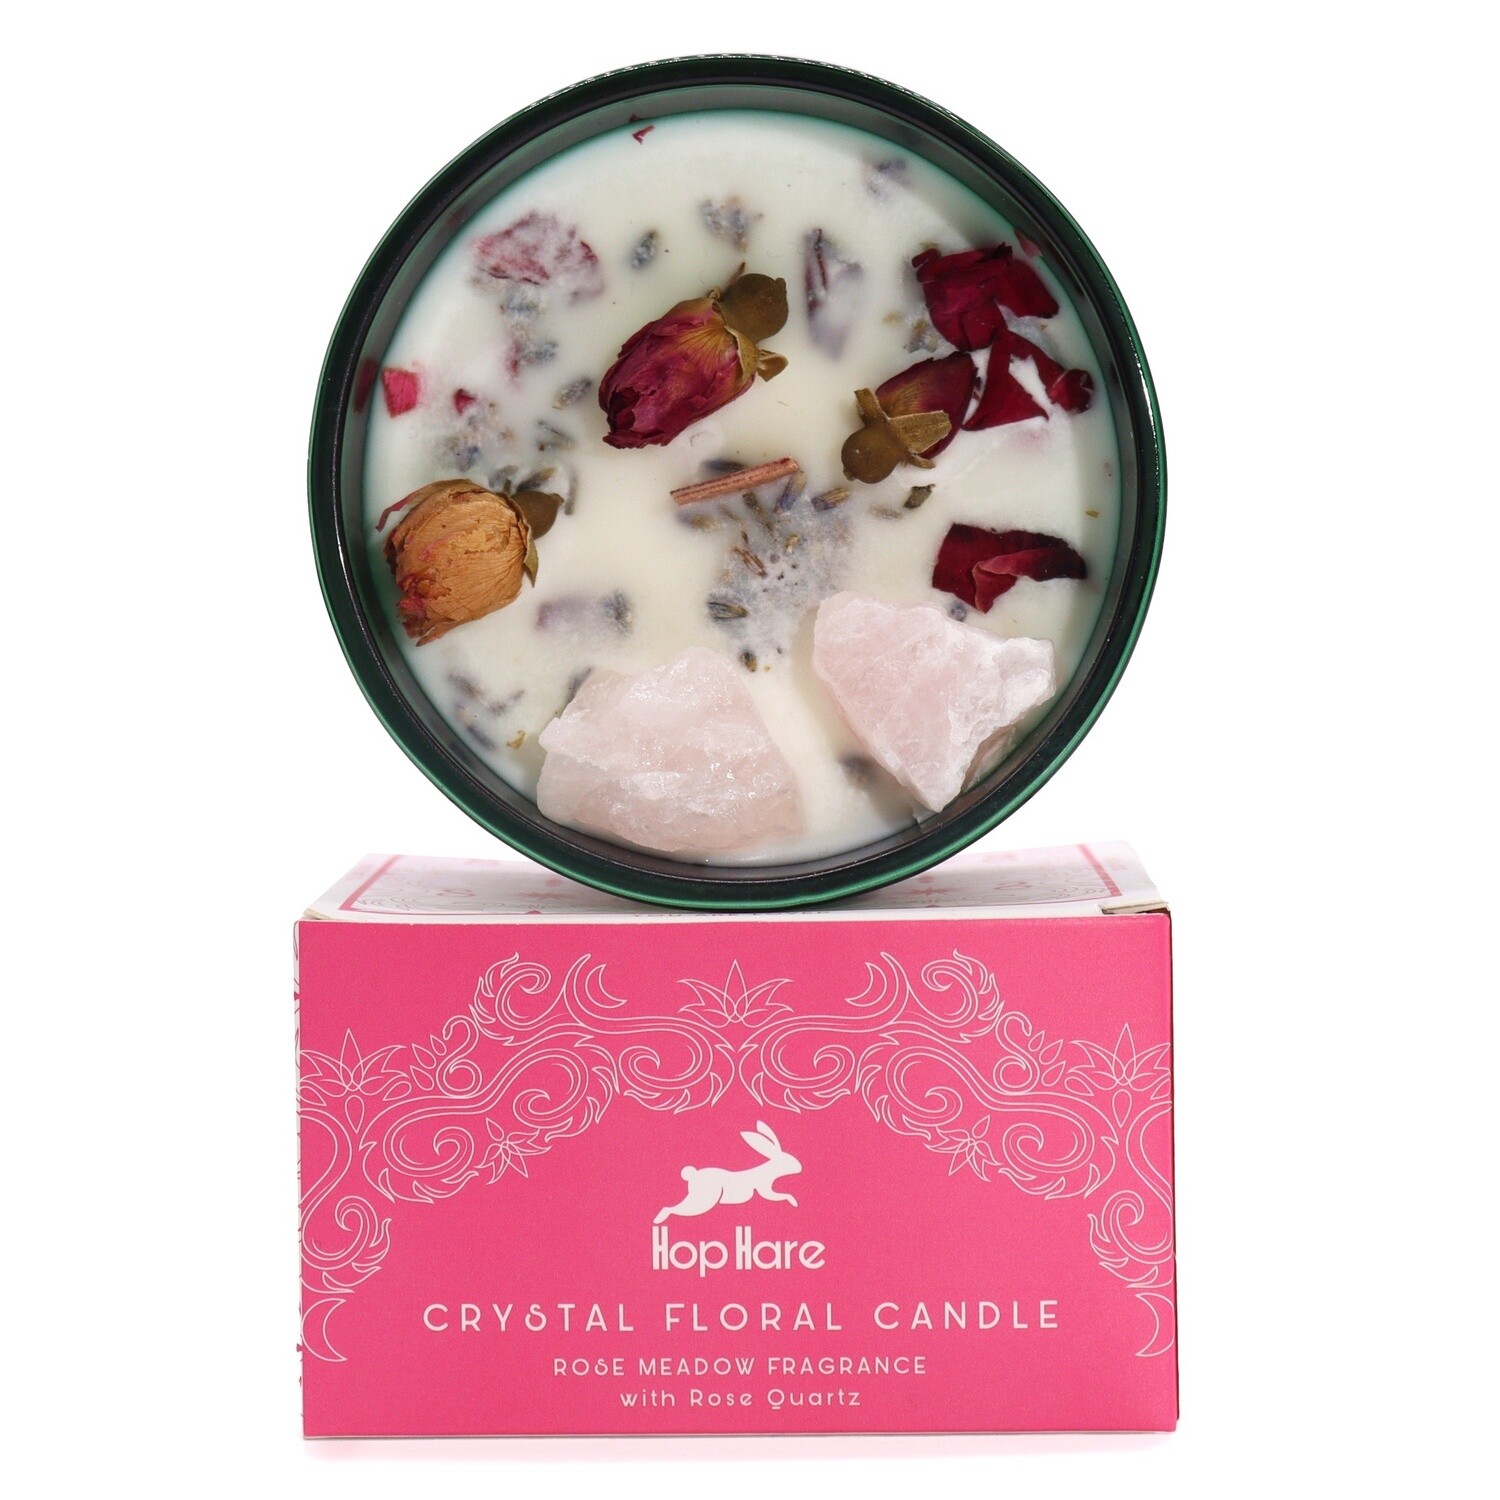 Hop Hare Crystal Magic Flower Candle